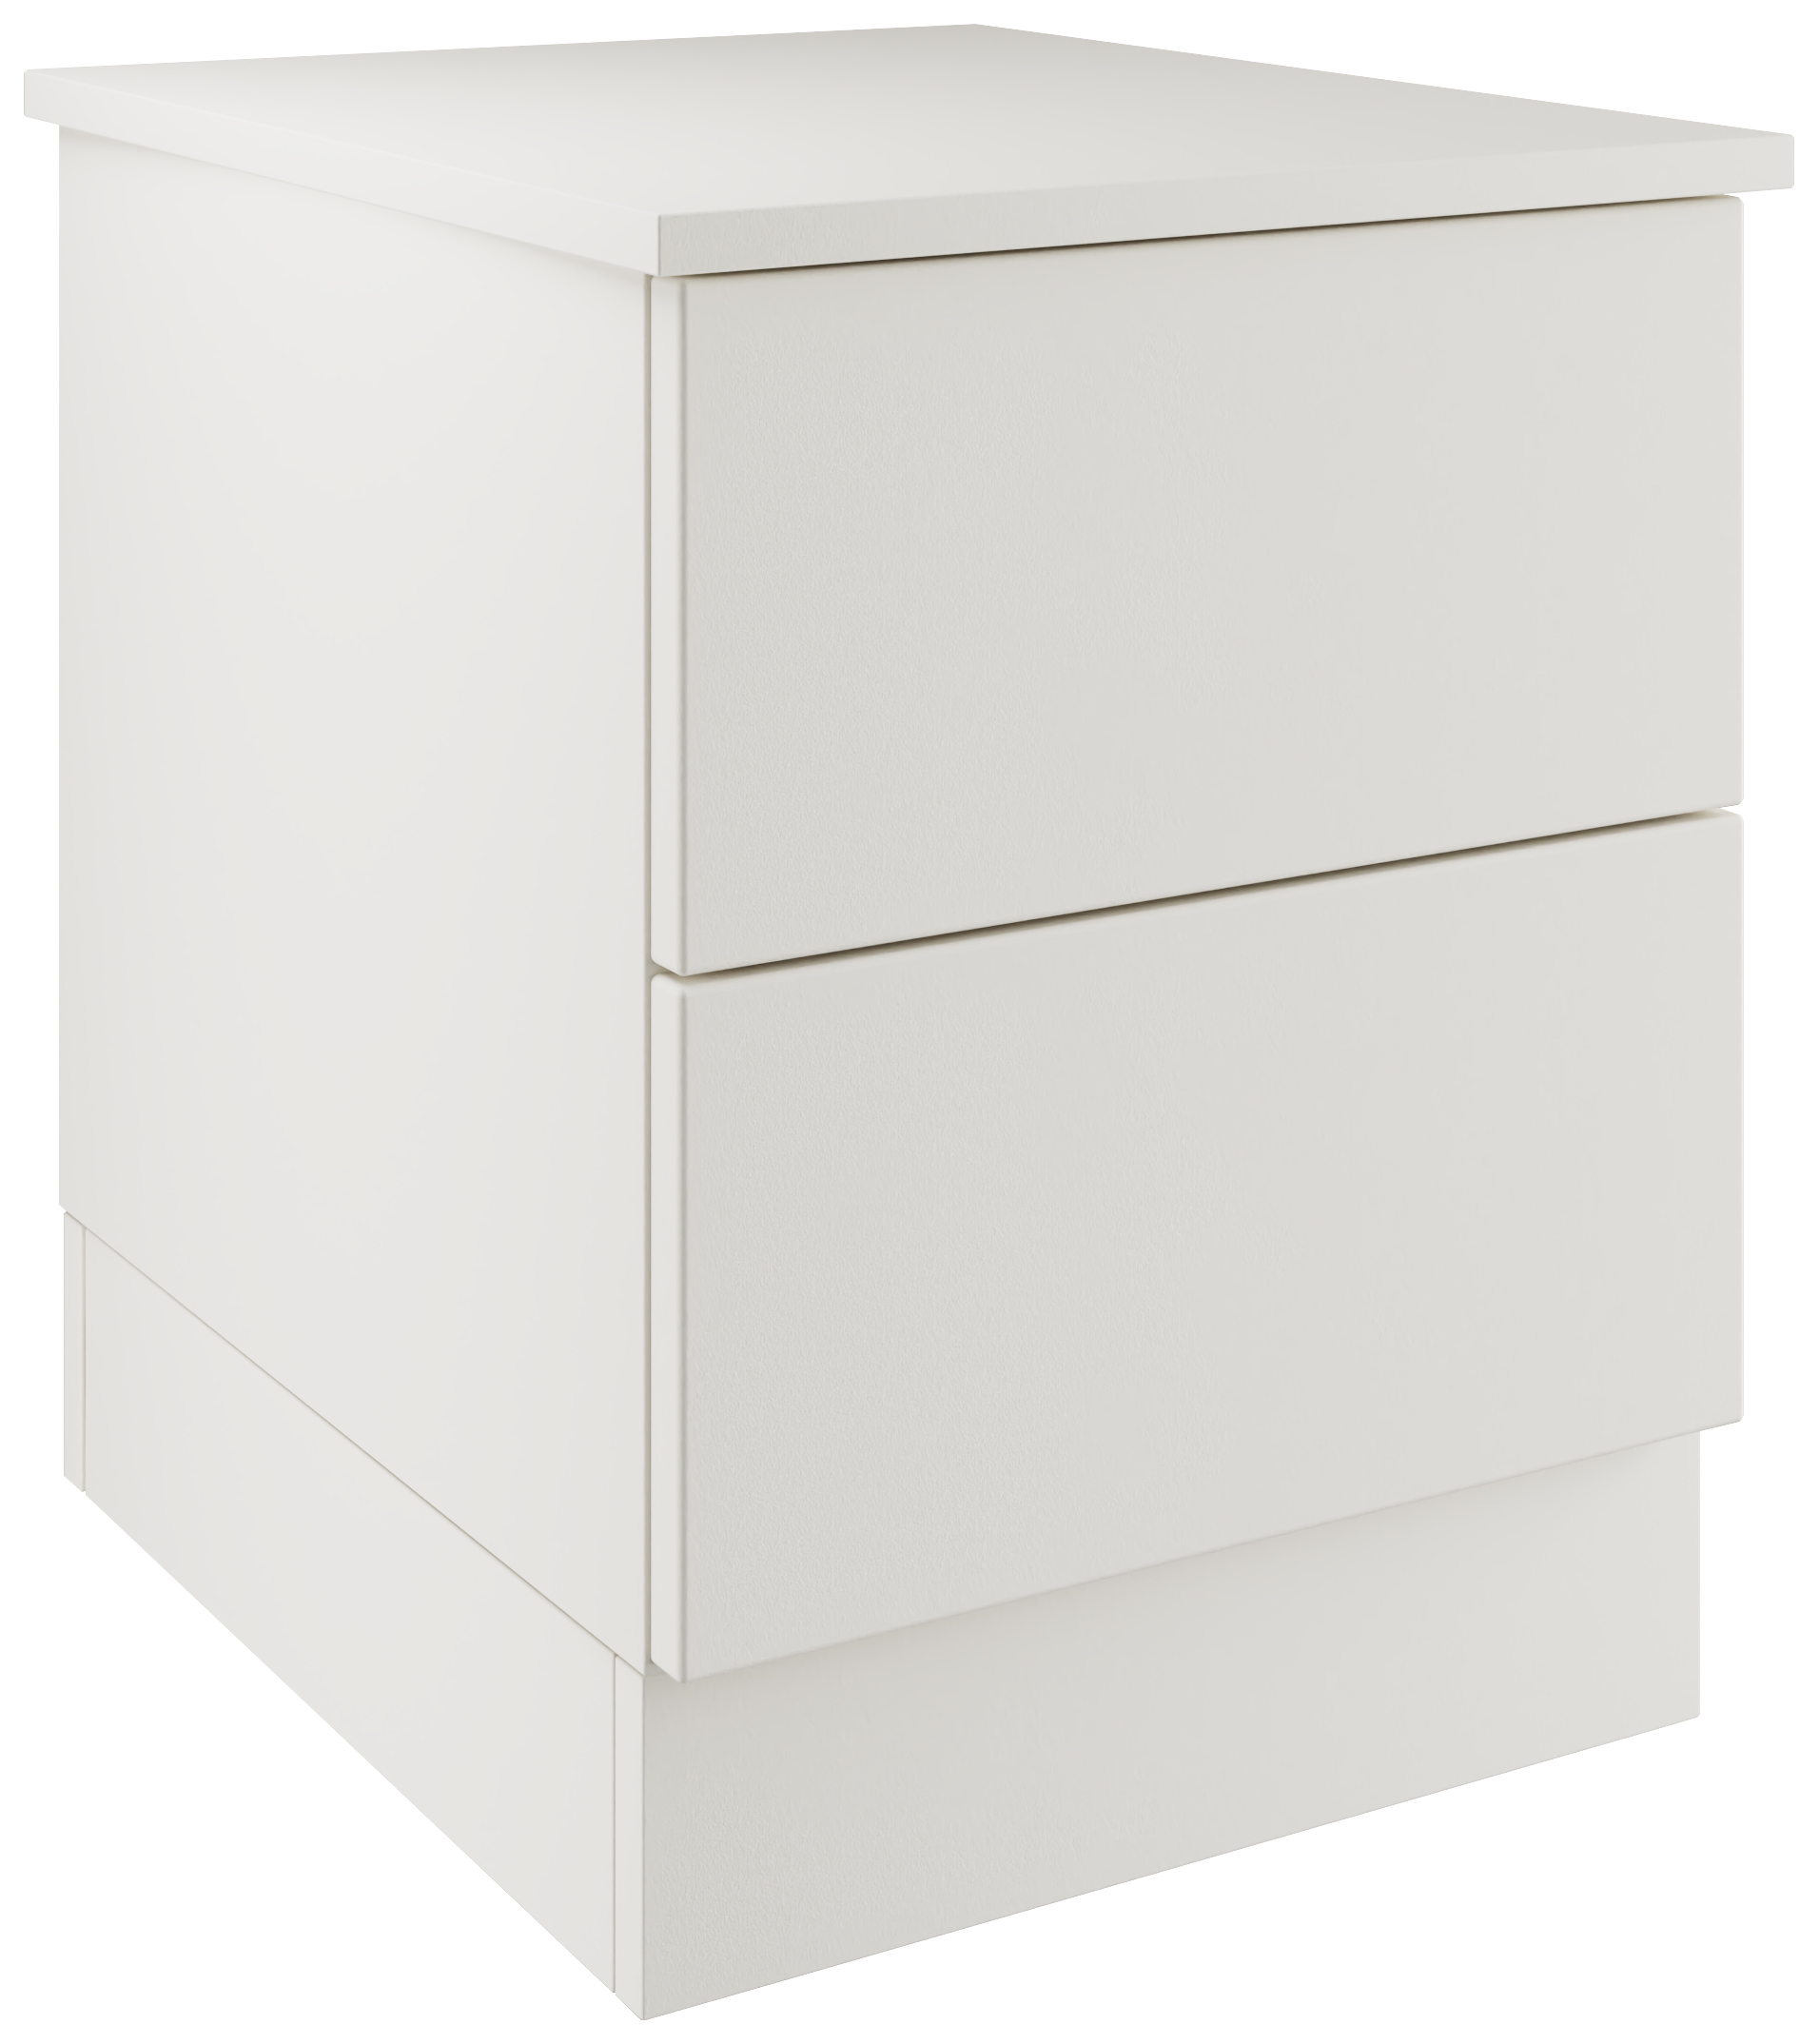 Harrogate & Bramham White Bedside Chest with 2 Drawers - 420 x 527 x 520mm